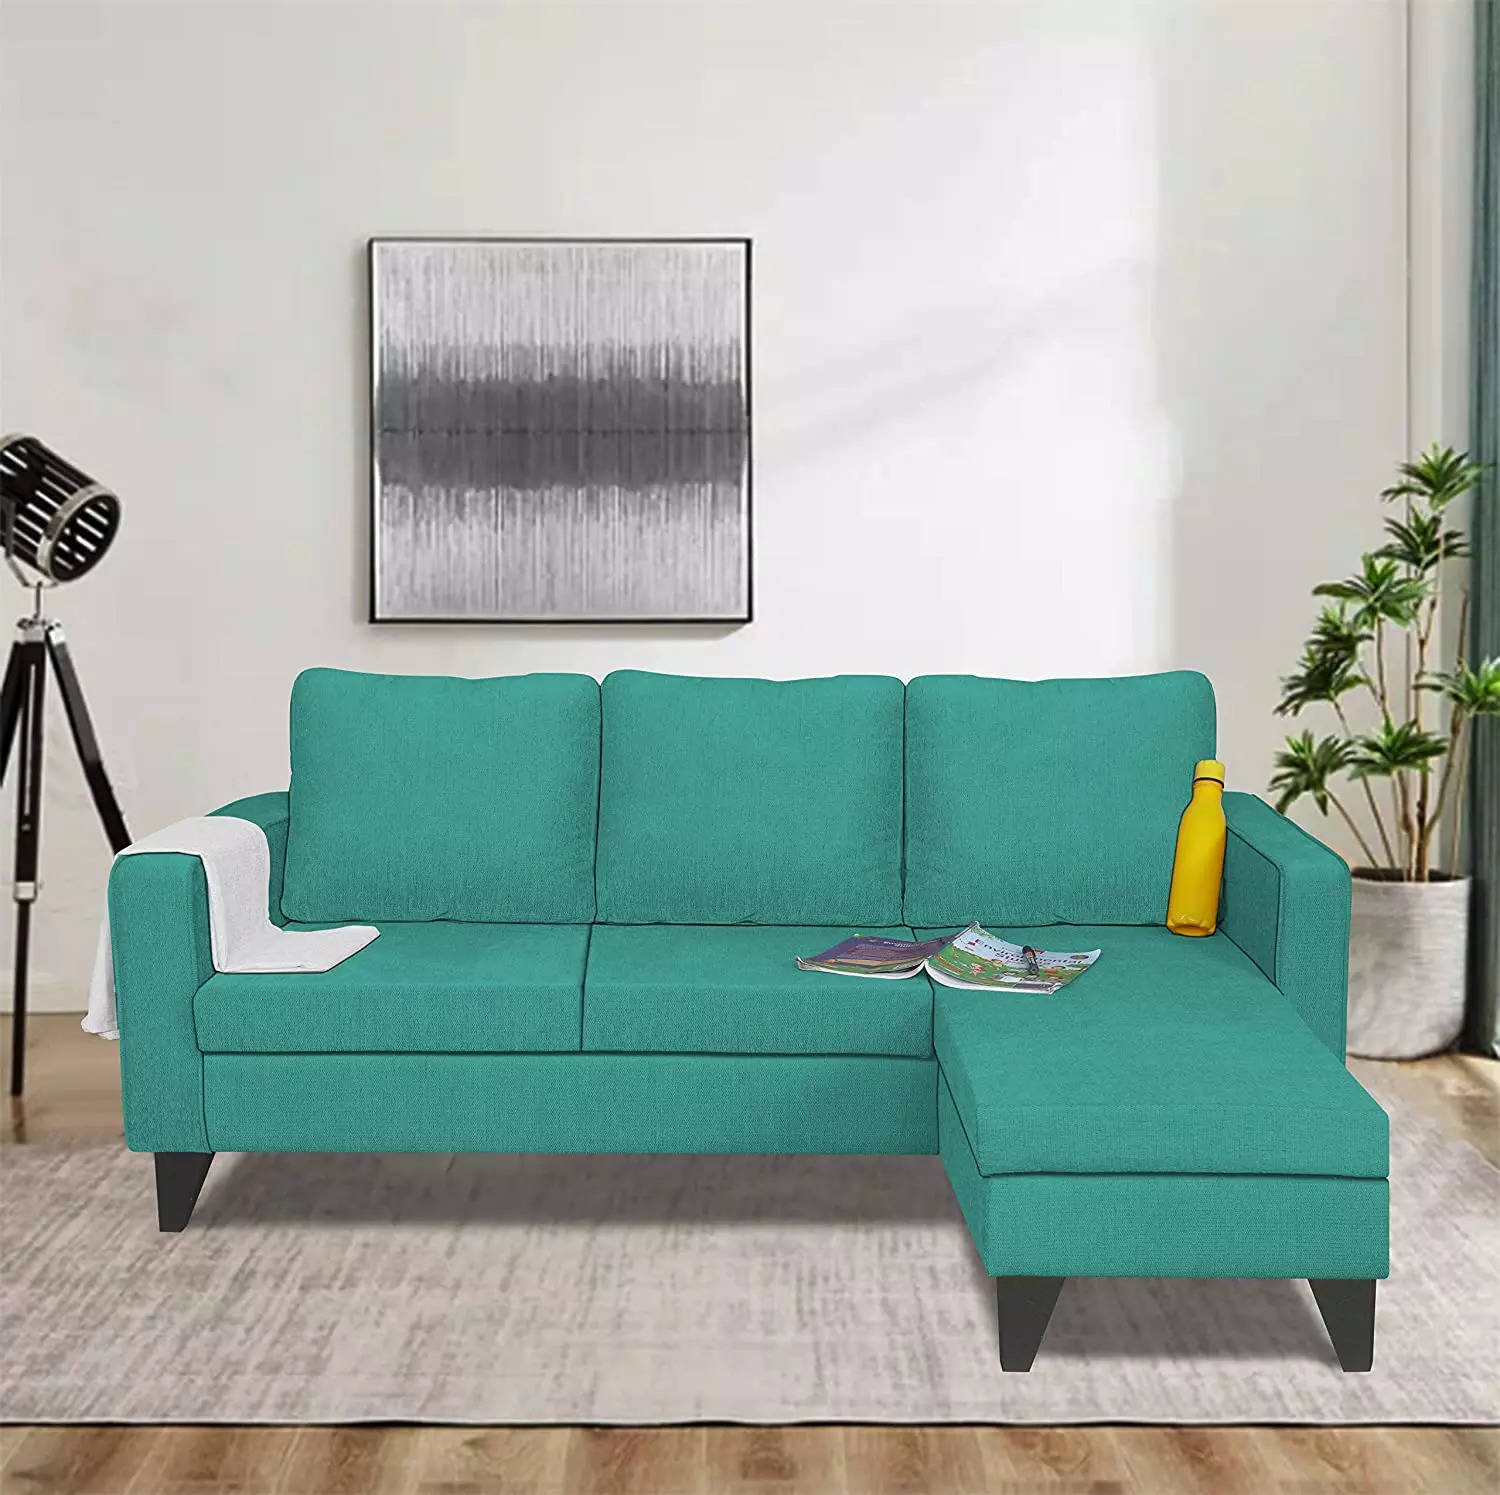 Best Sofa Sets Under 15000 In India